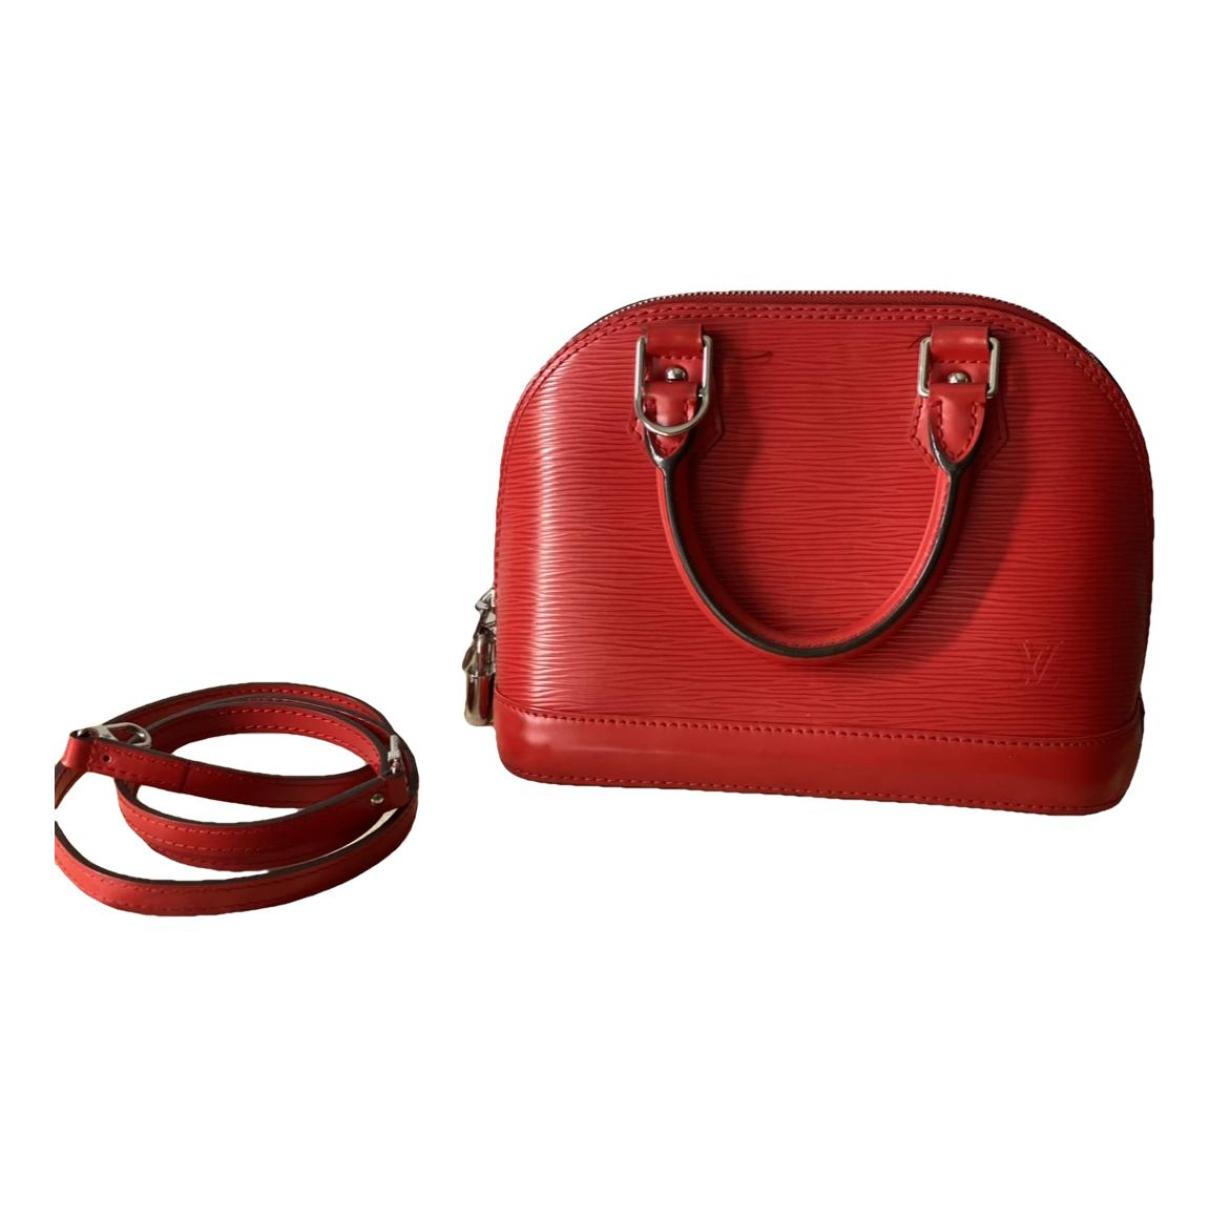 Soft lockit leather handbag Louis Vuitton Red in Leather - 26593605